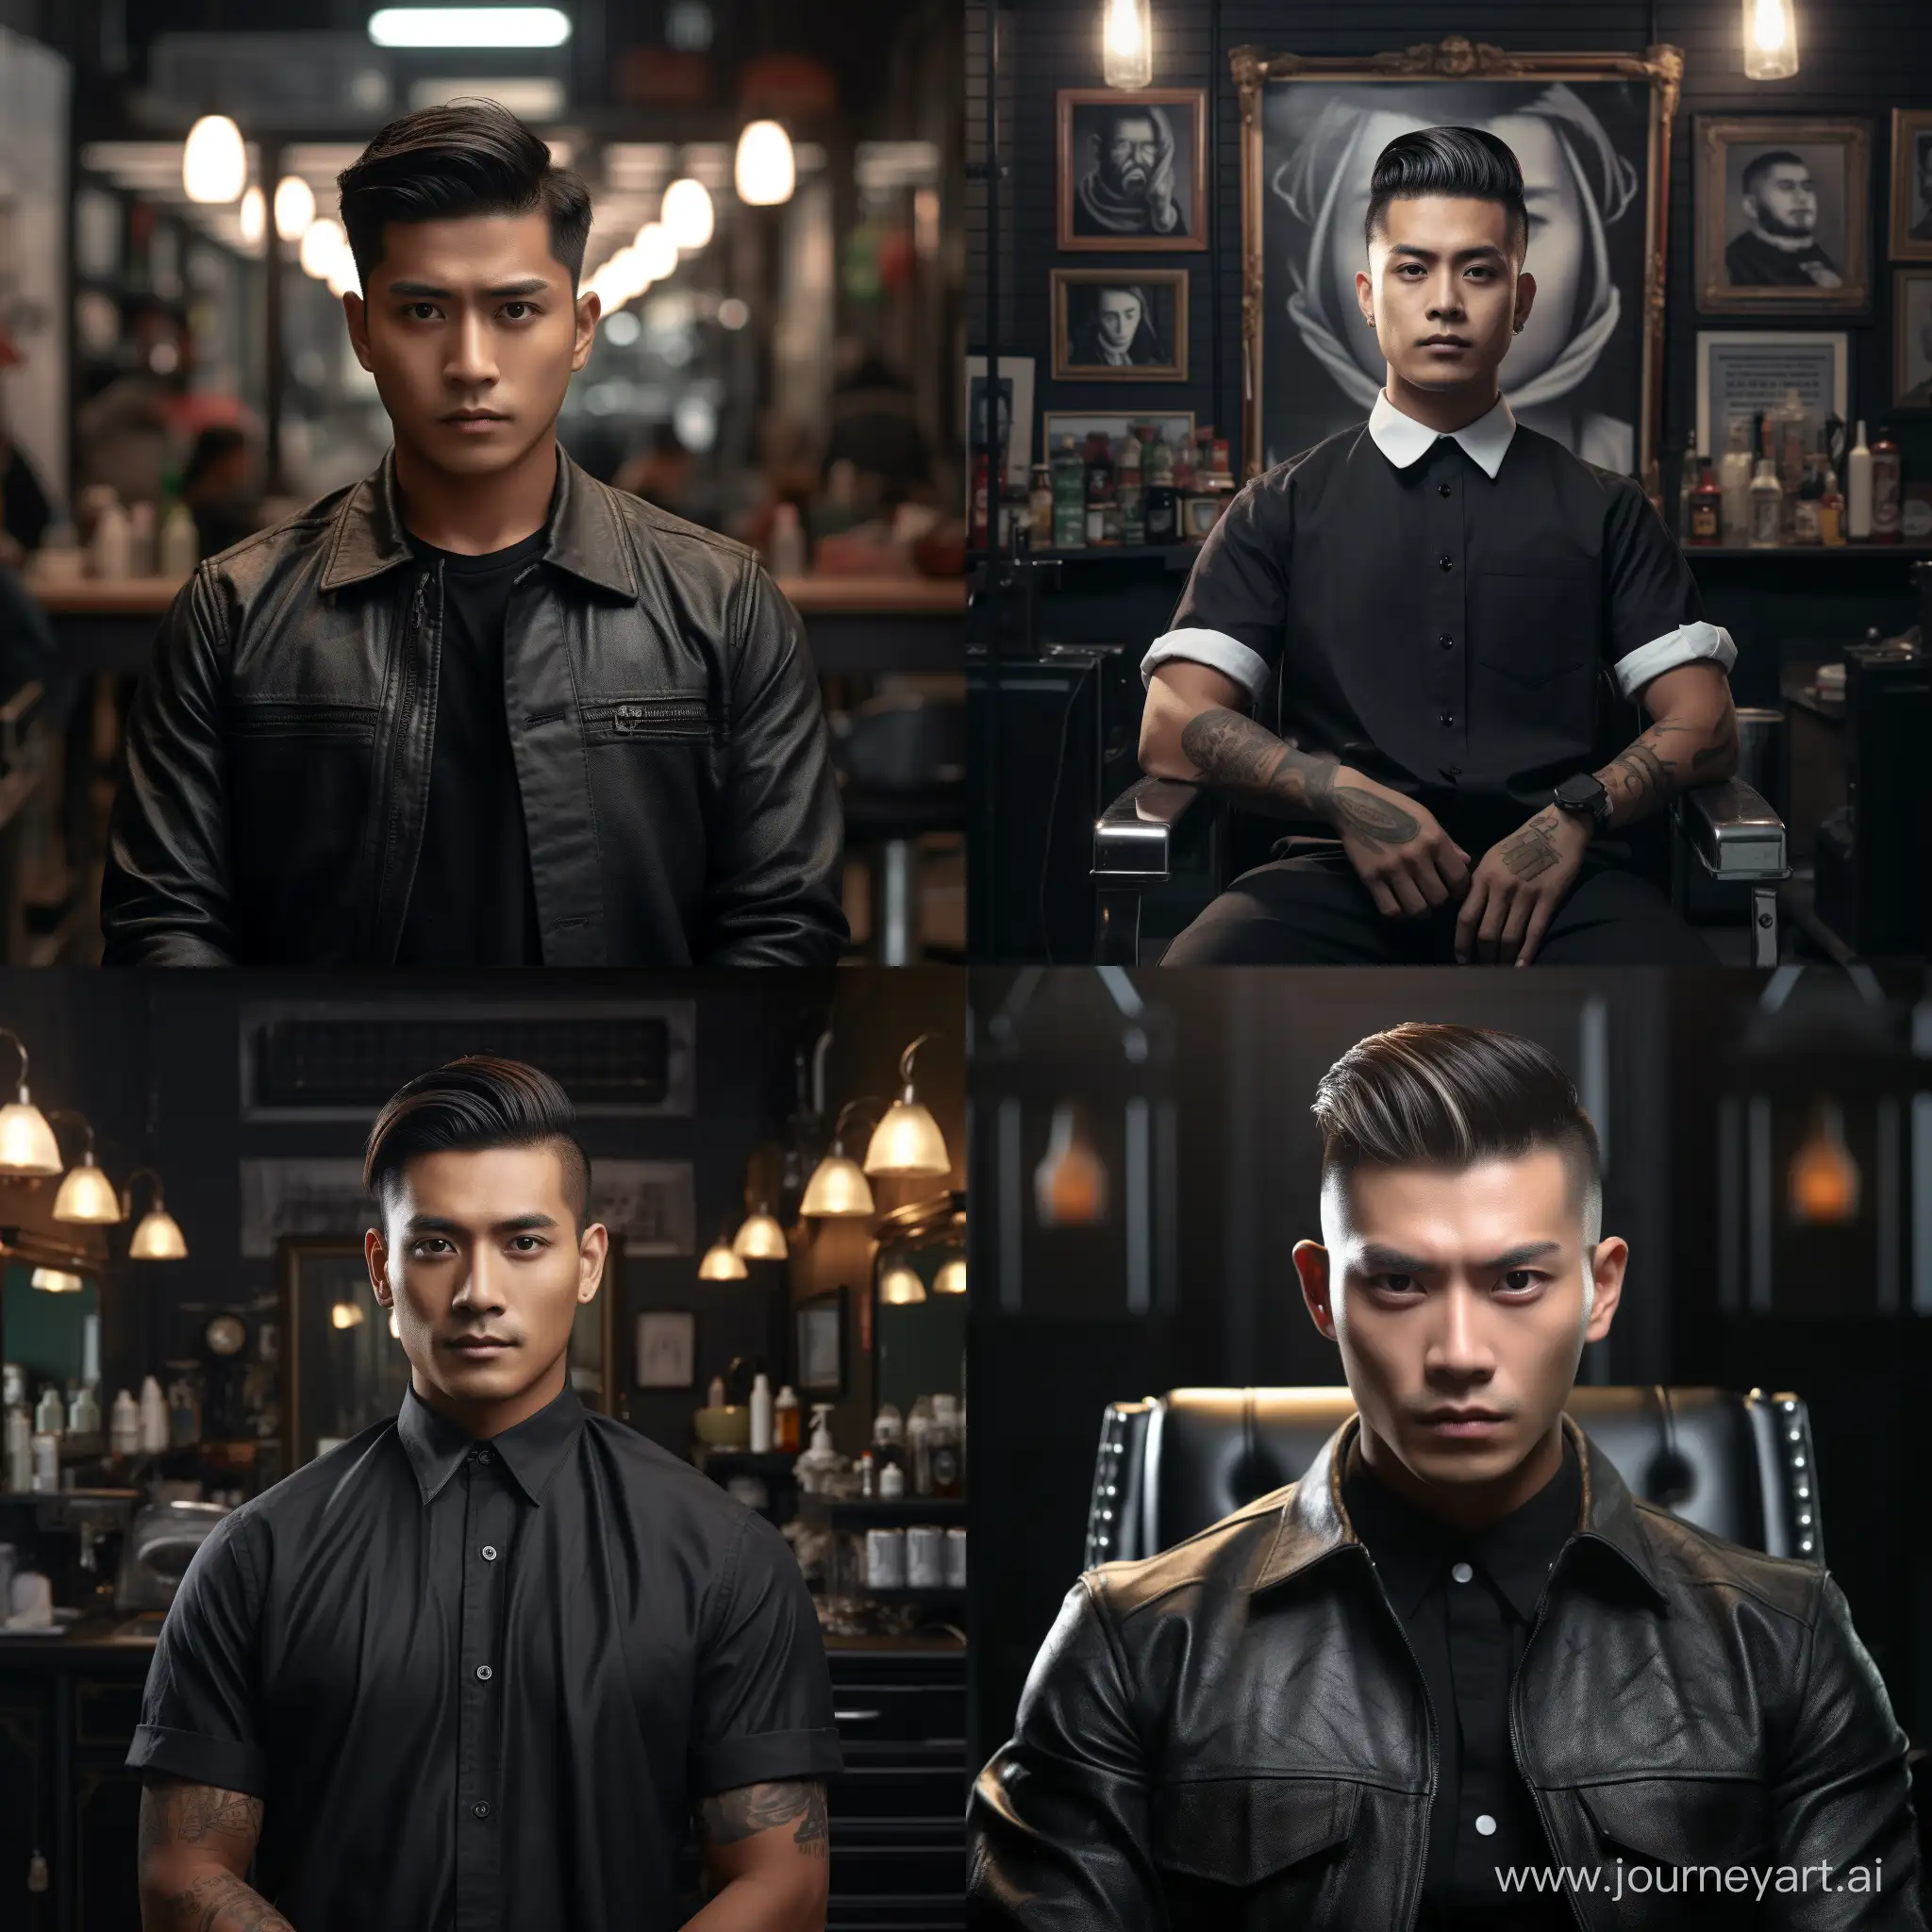 An goodlooking handsome indonesian cool barber man at the barbershop, front view, hyperrealistic, at barbershop situation, nice man hair style, studio lighting